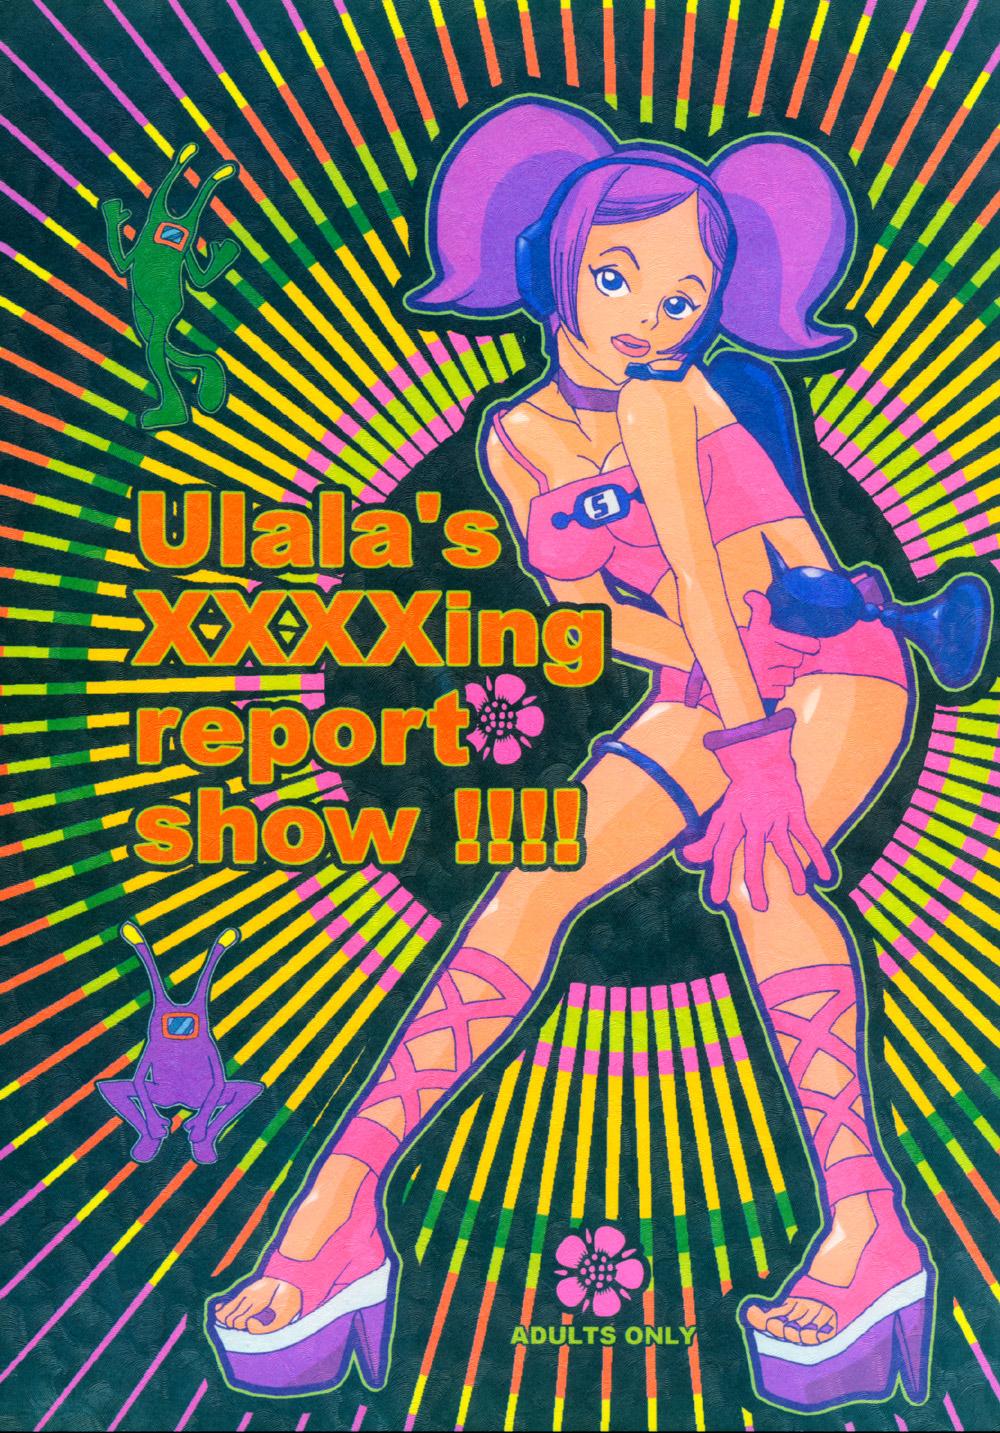 Cream Pie Ulala's XXXXing Report Show!!!! - Space channel 5 Rubdown - Page 1